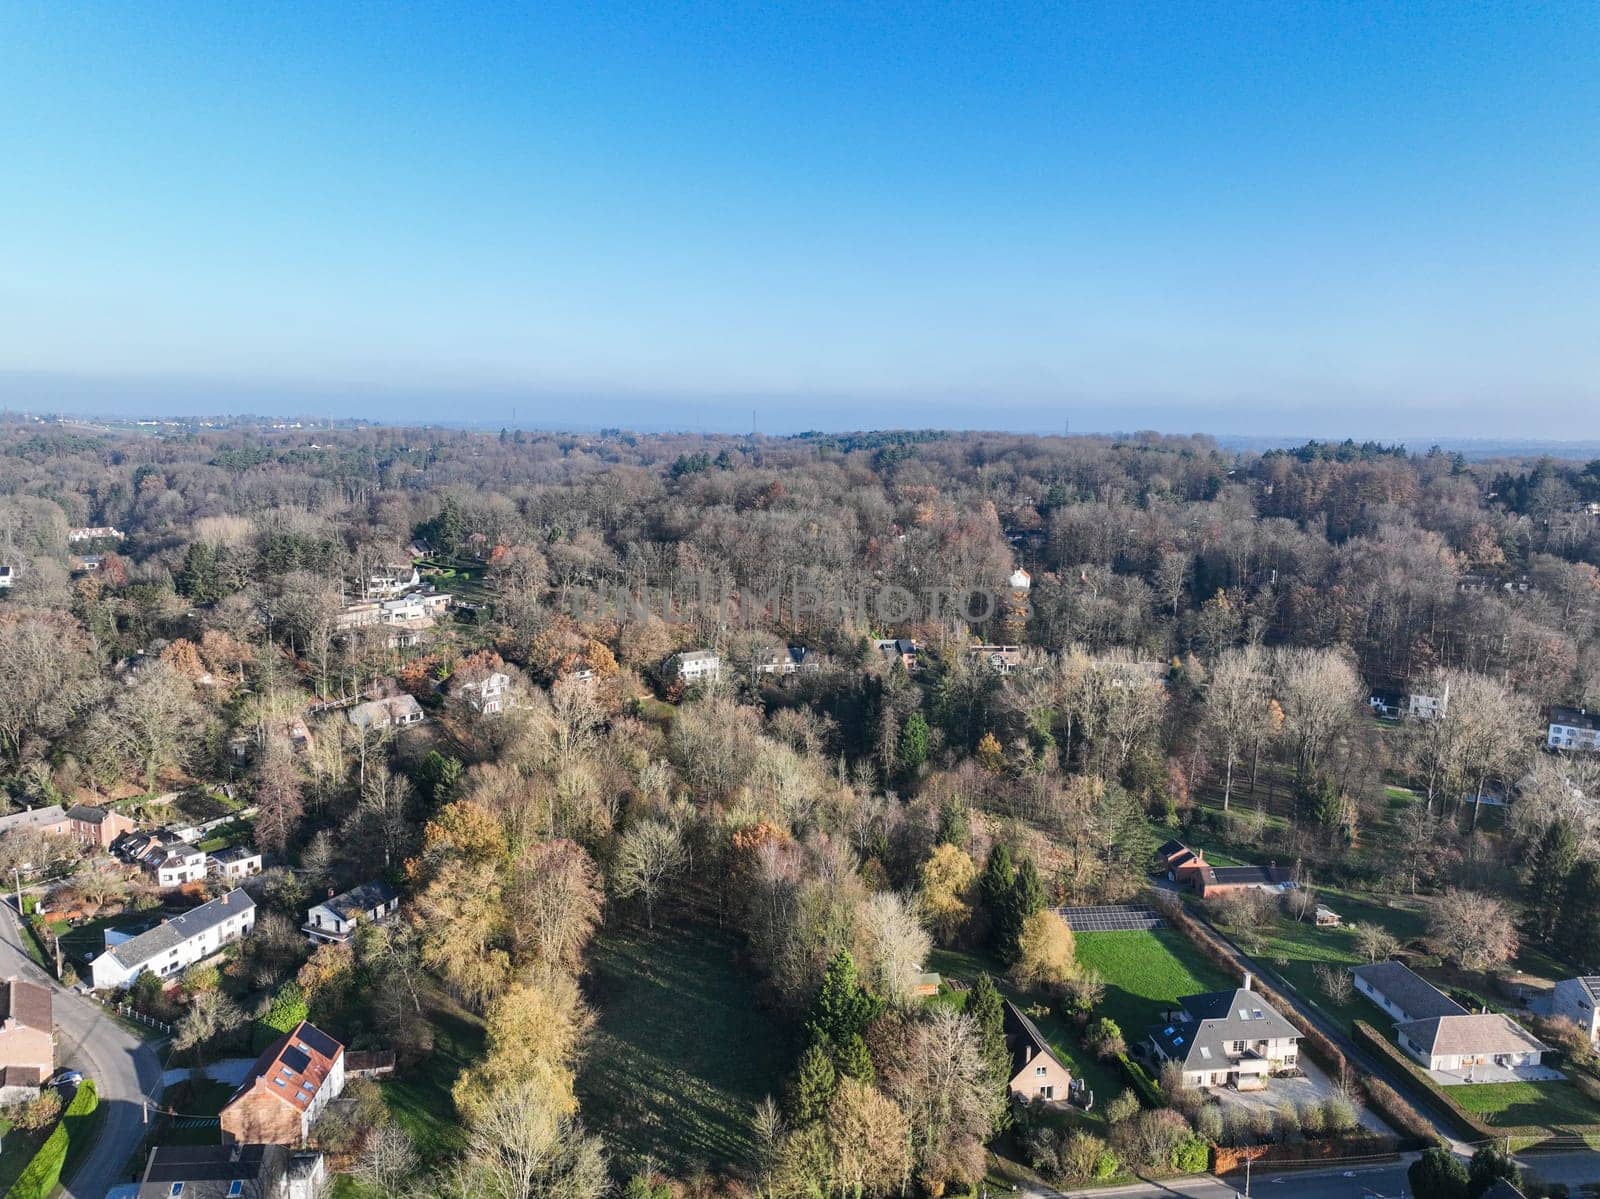 Aerial view of small countryside town in the area of Walloon, Belgium by Bonandbon